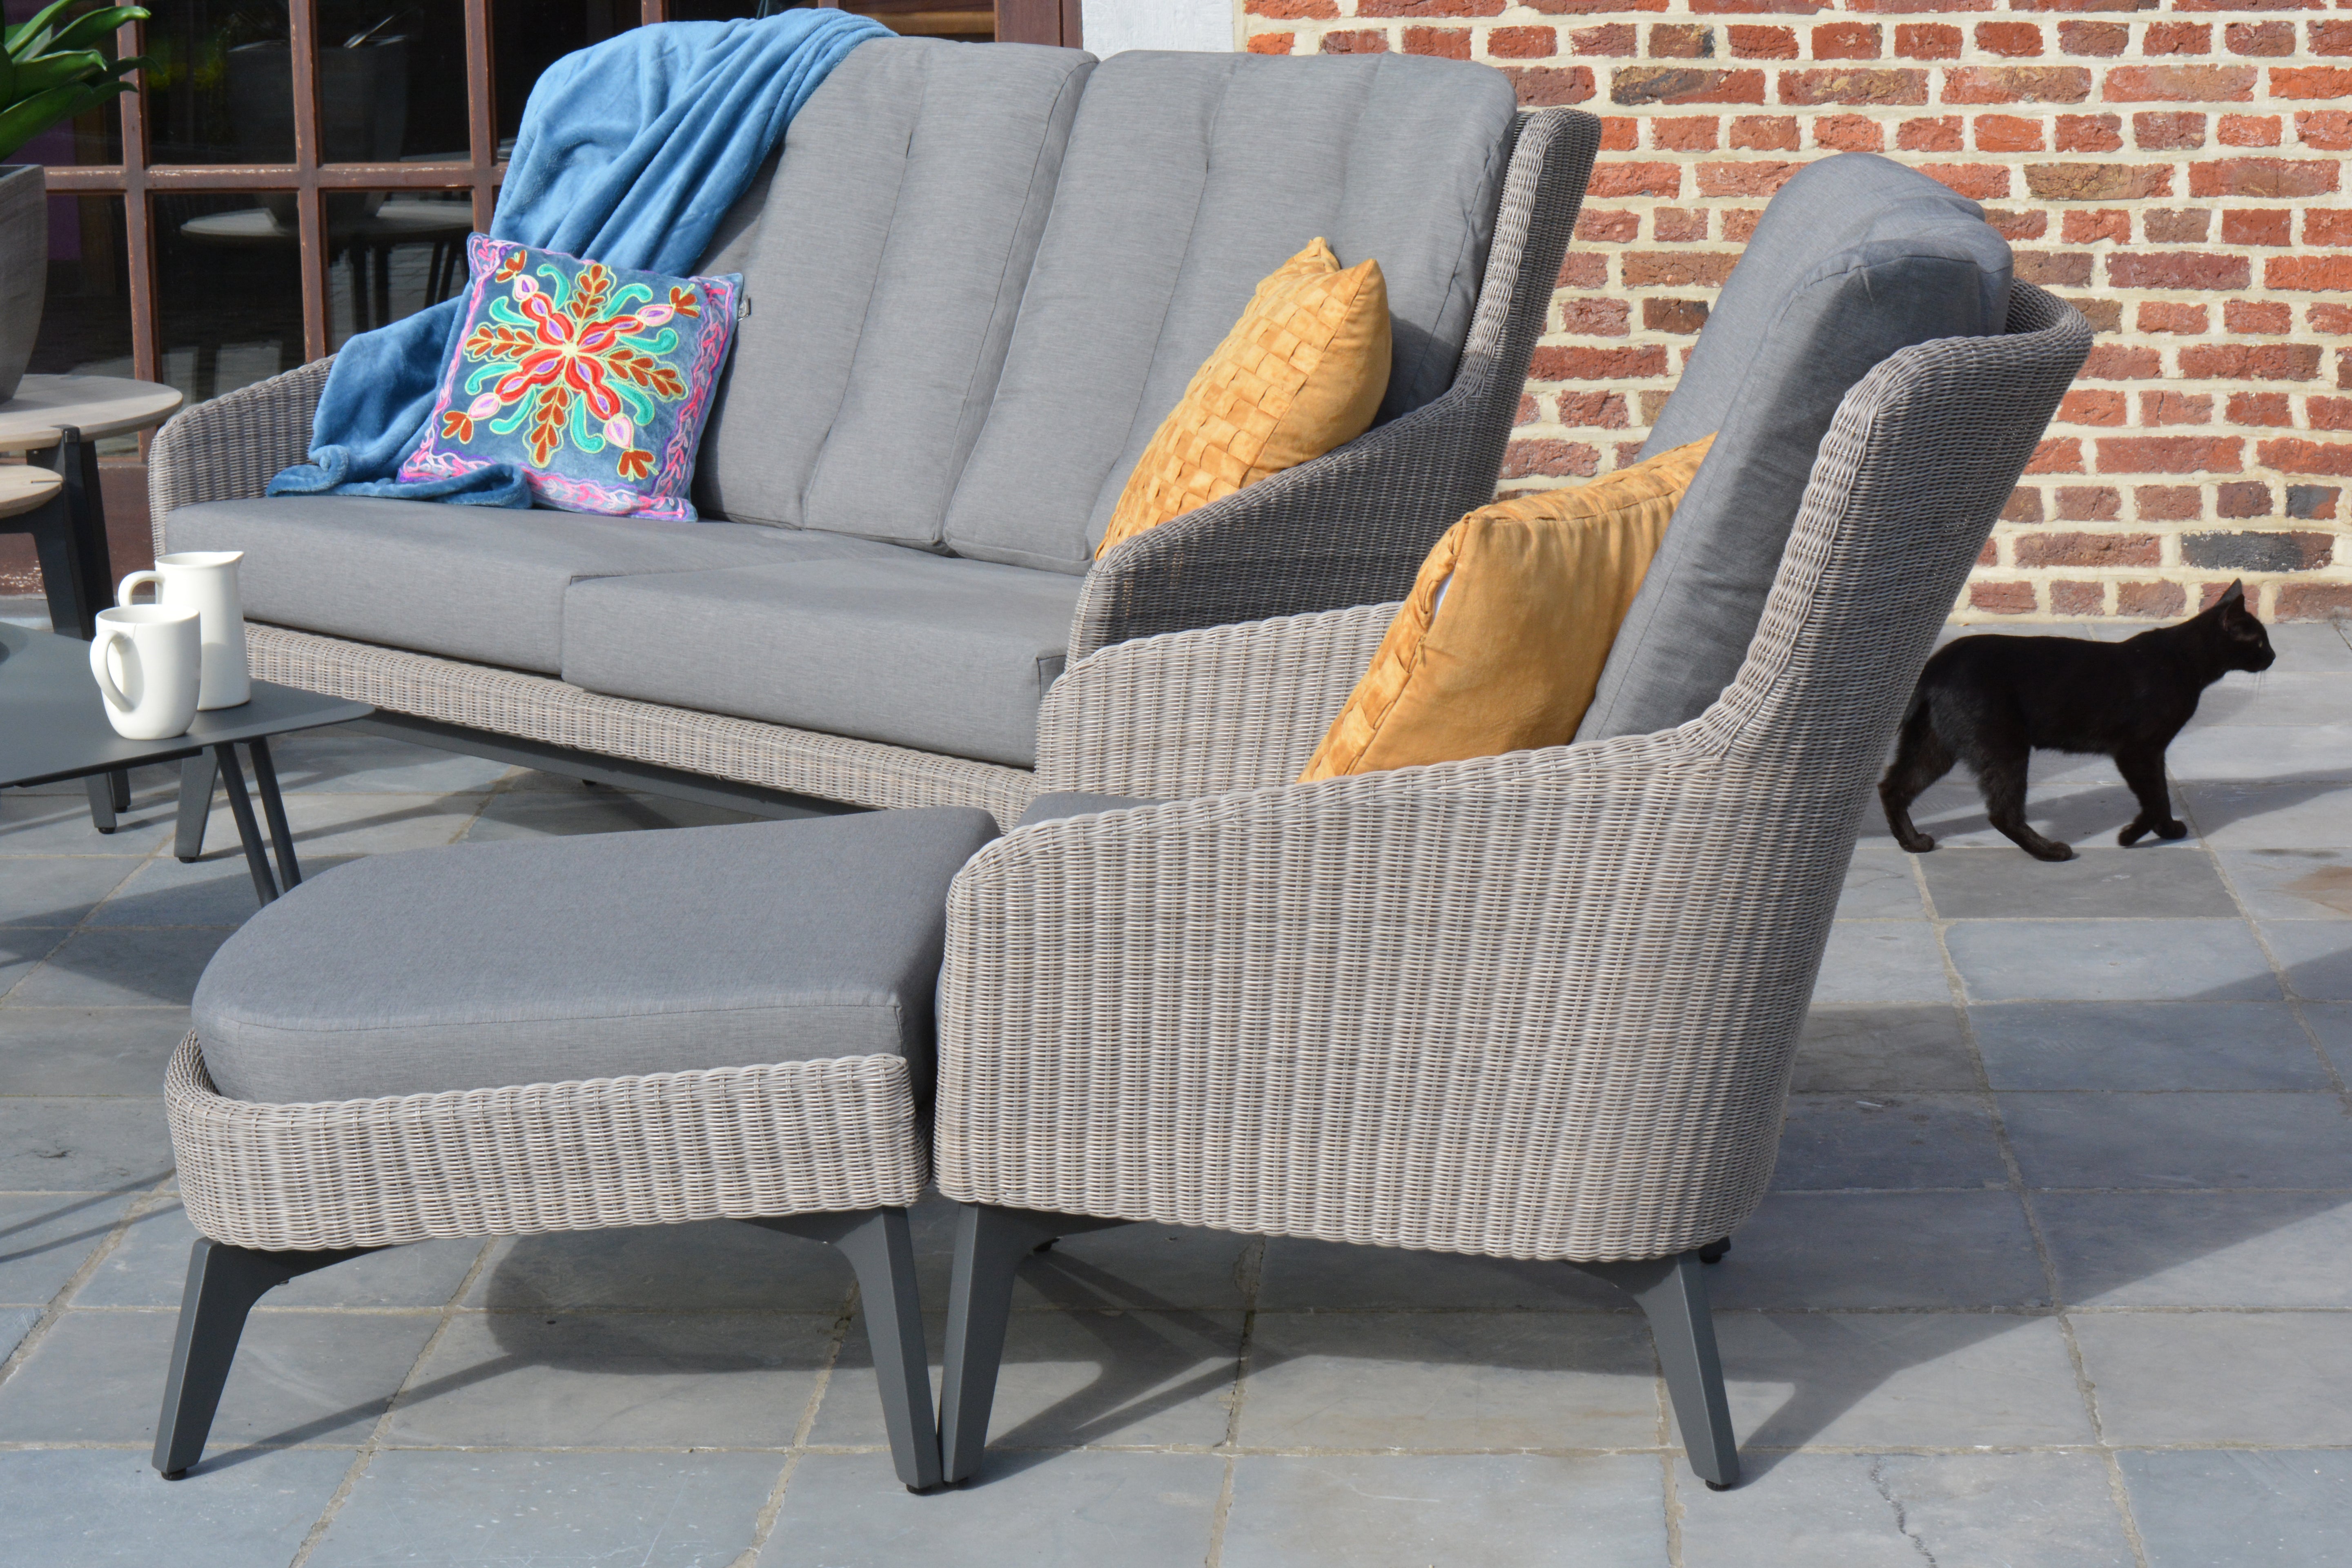 4 Seasons Outdoor Luxor Living Chair With 2 Cushions